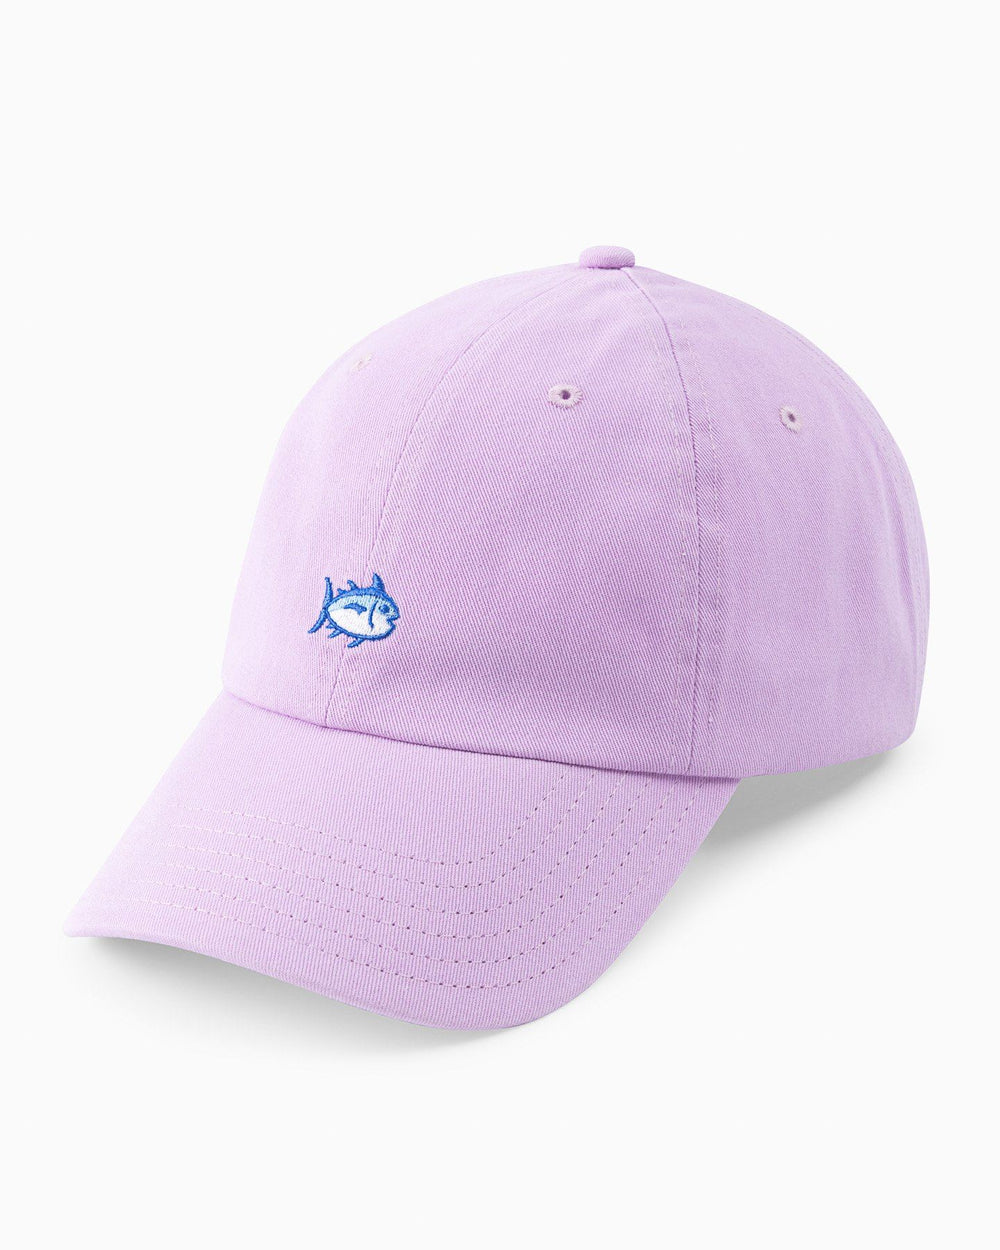 The front of the Skipjack Hat by Southern Tide - Heliotrope